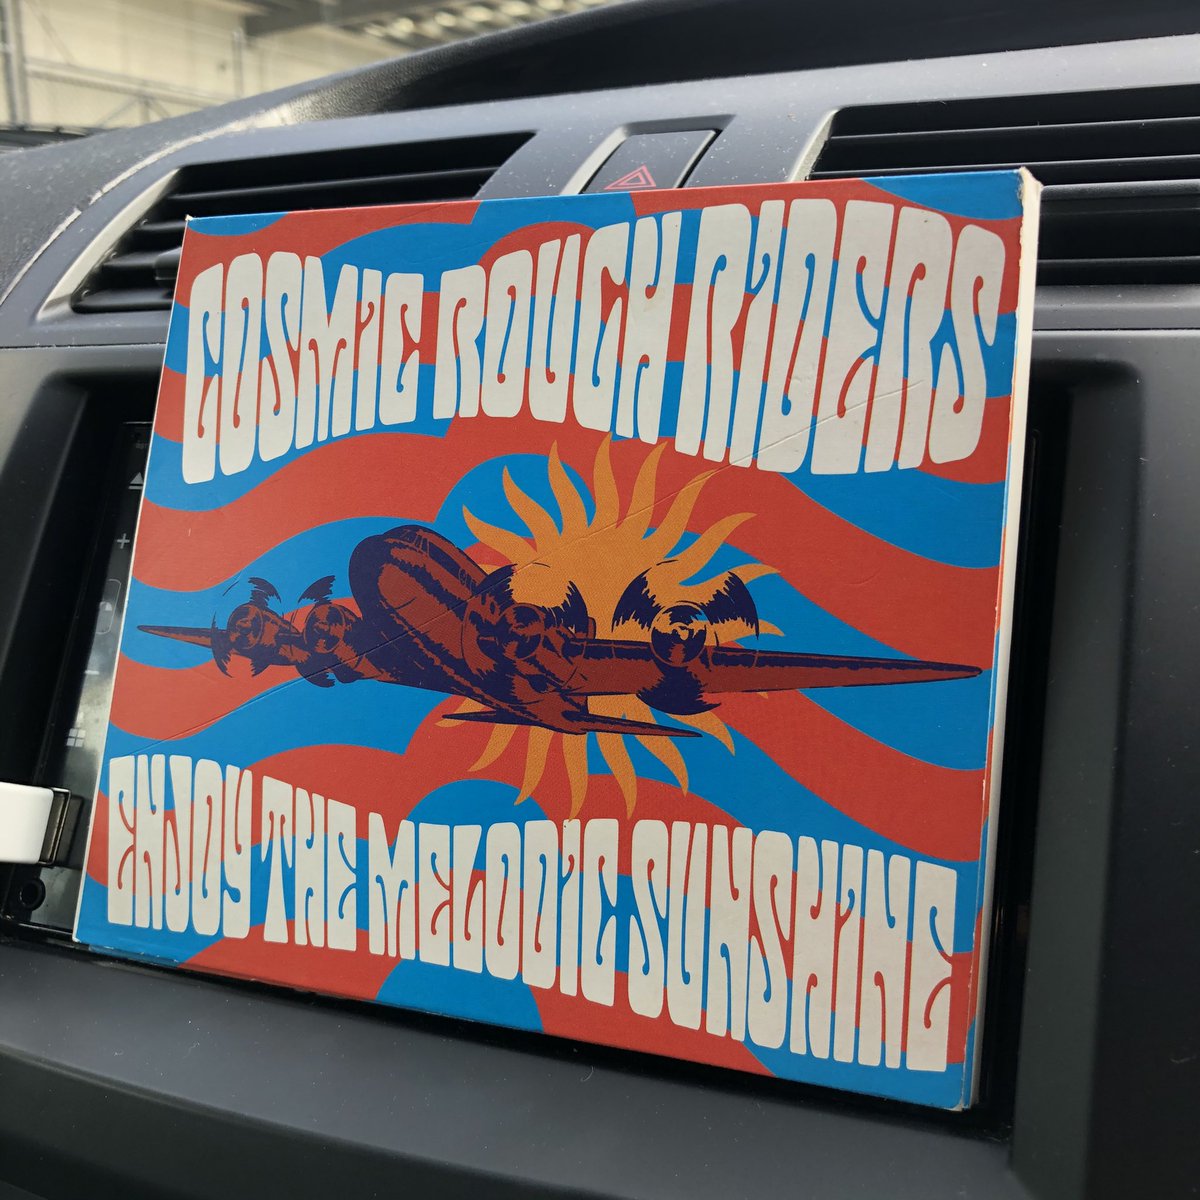 Listening to the Cosmic Rough Riders this morning on the drive to work